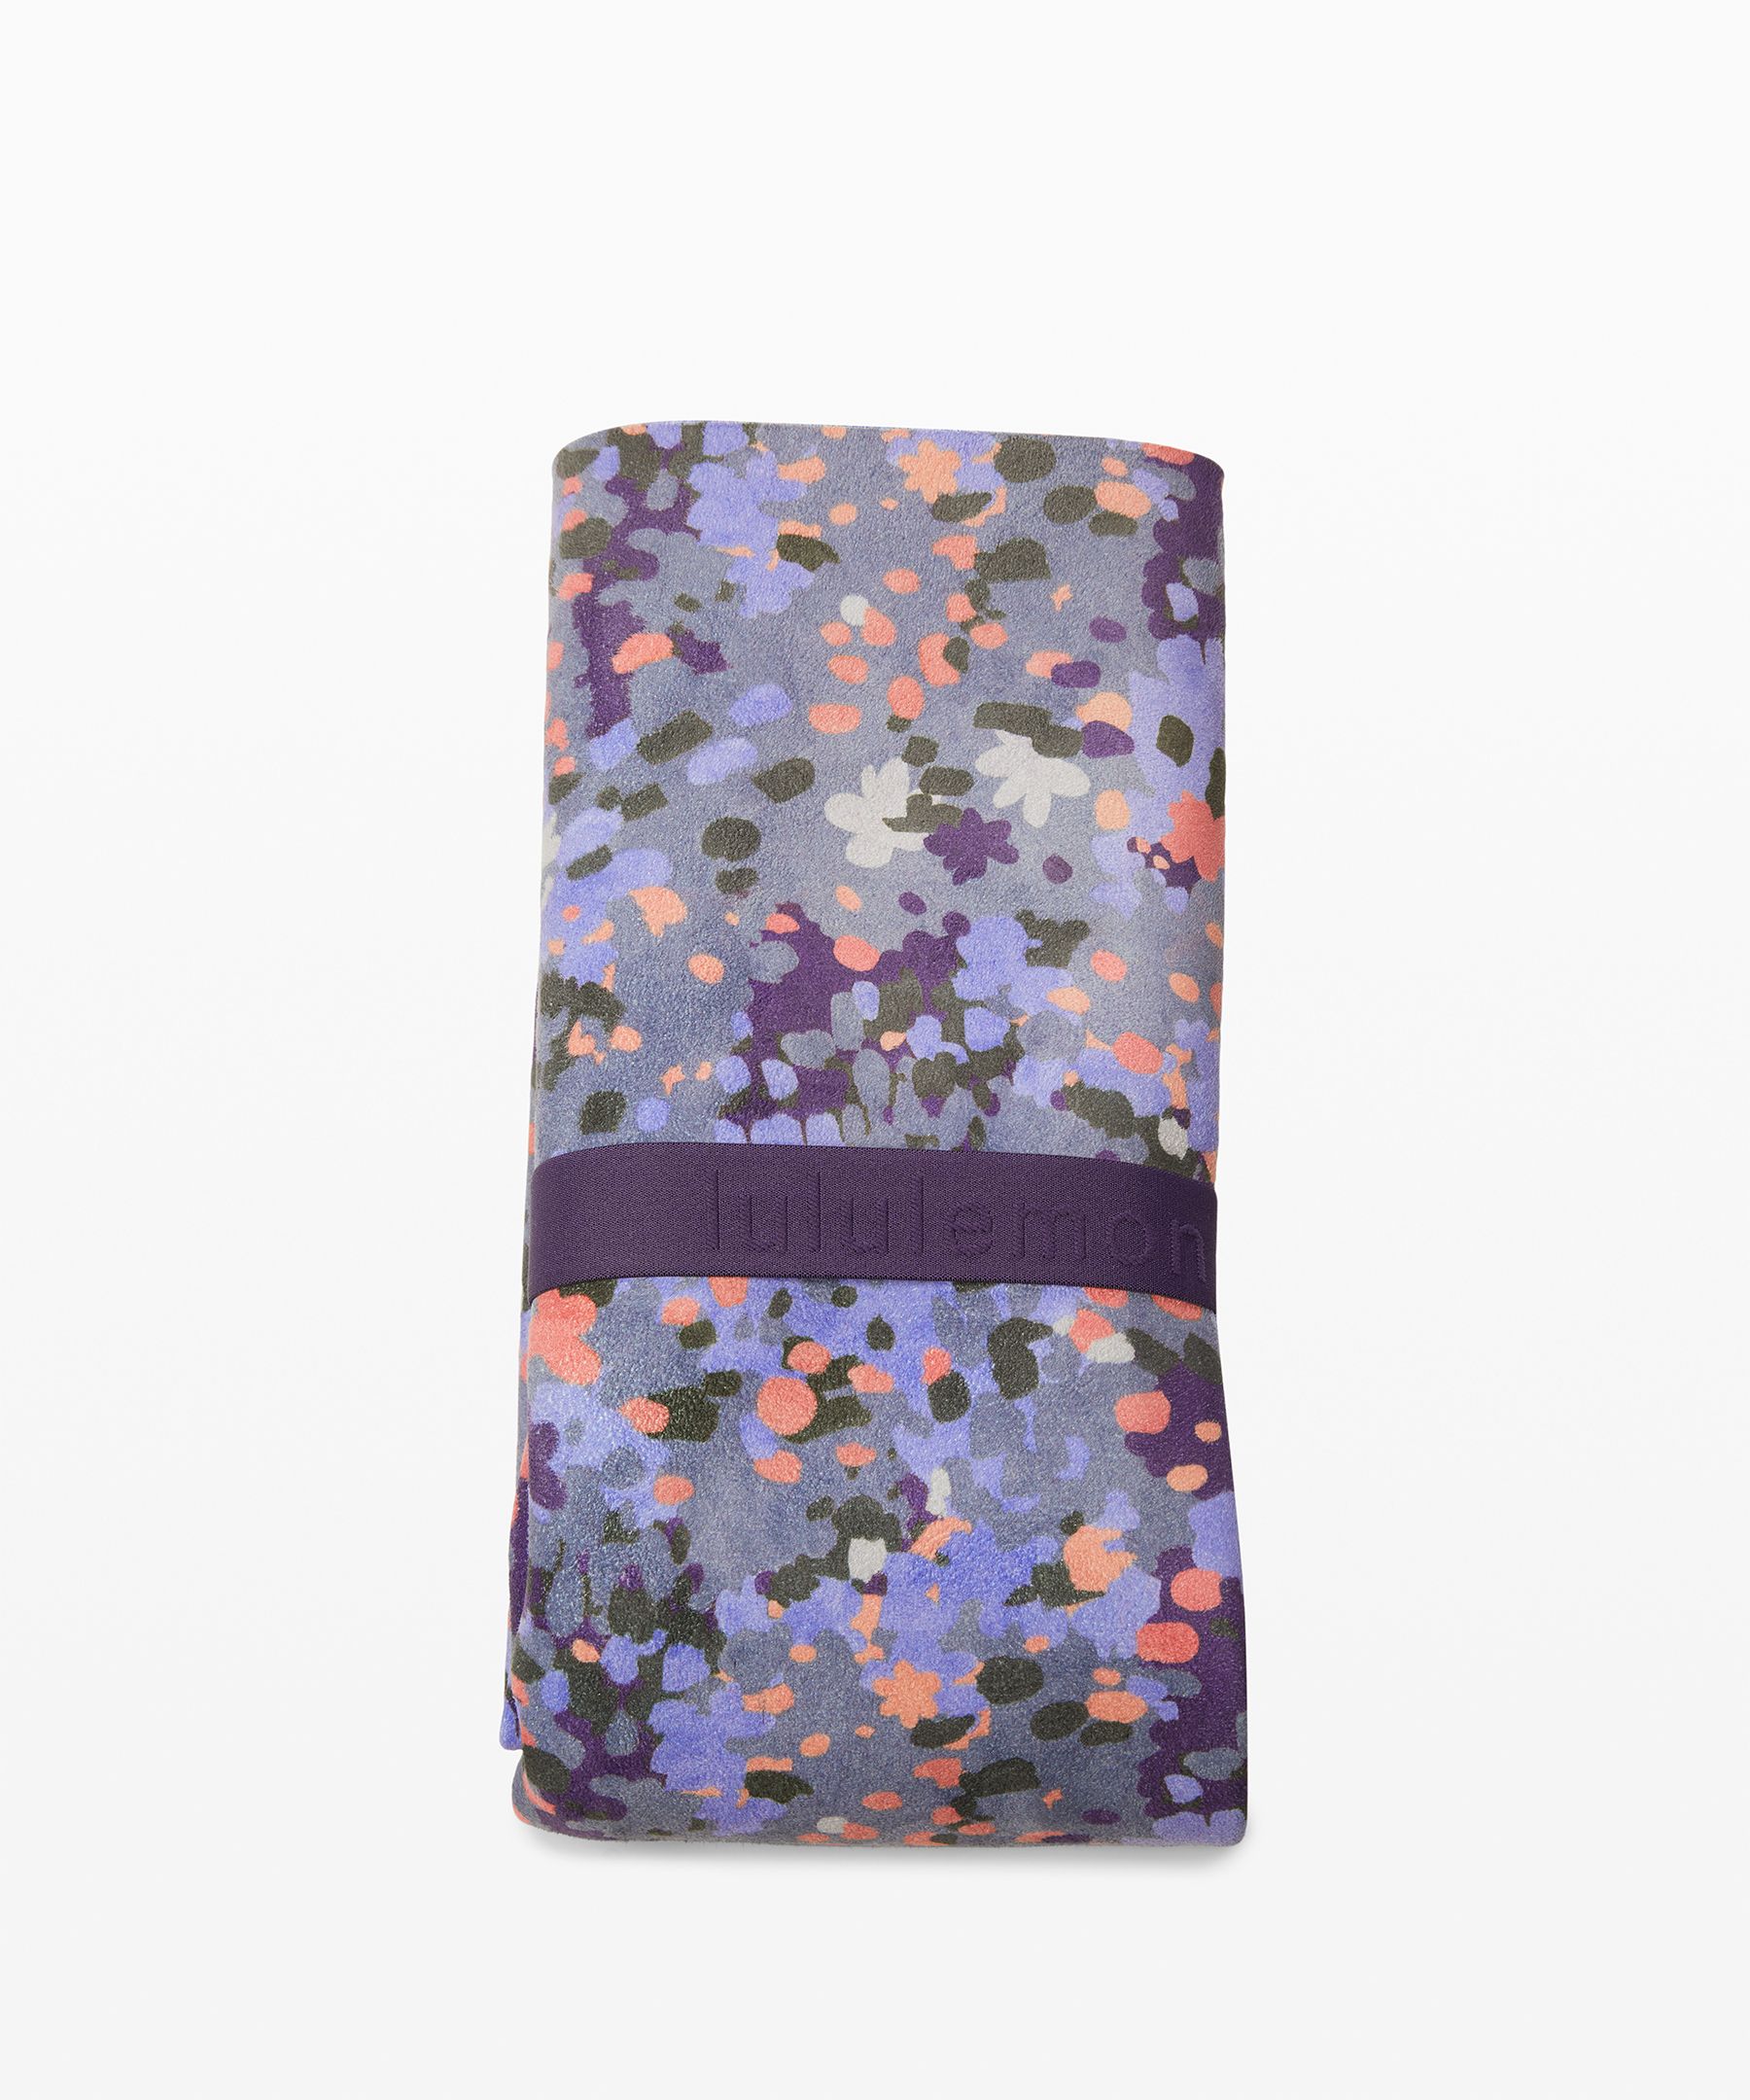 New Lululemon Carry Onwards Yoga Mat camouflage Dominican Republic